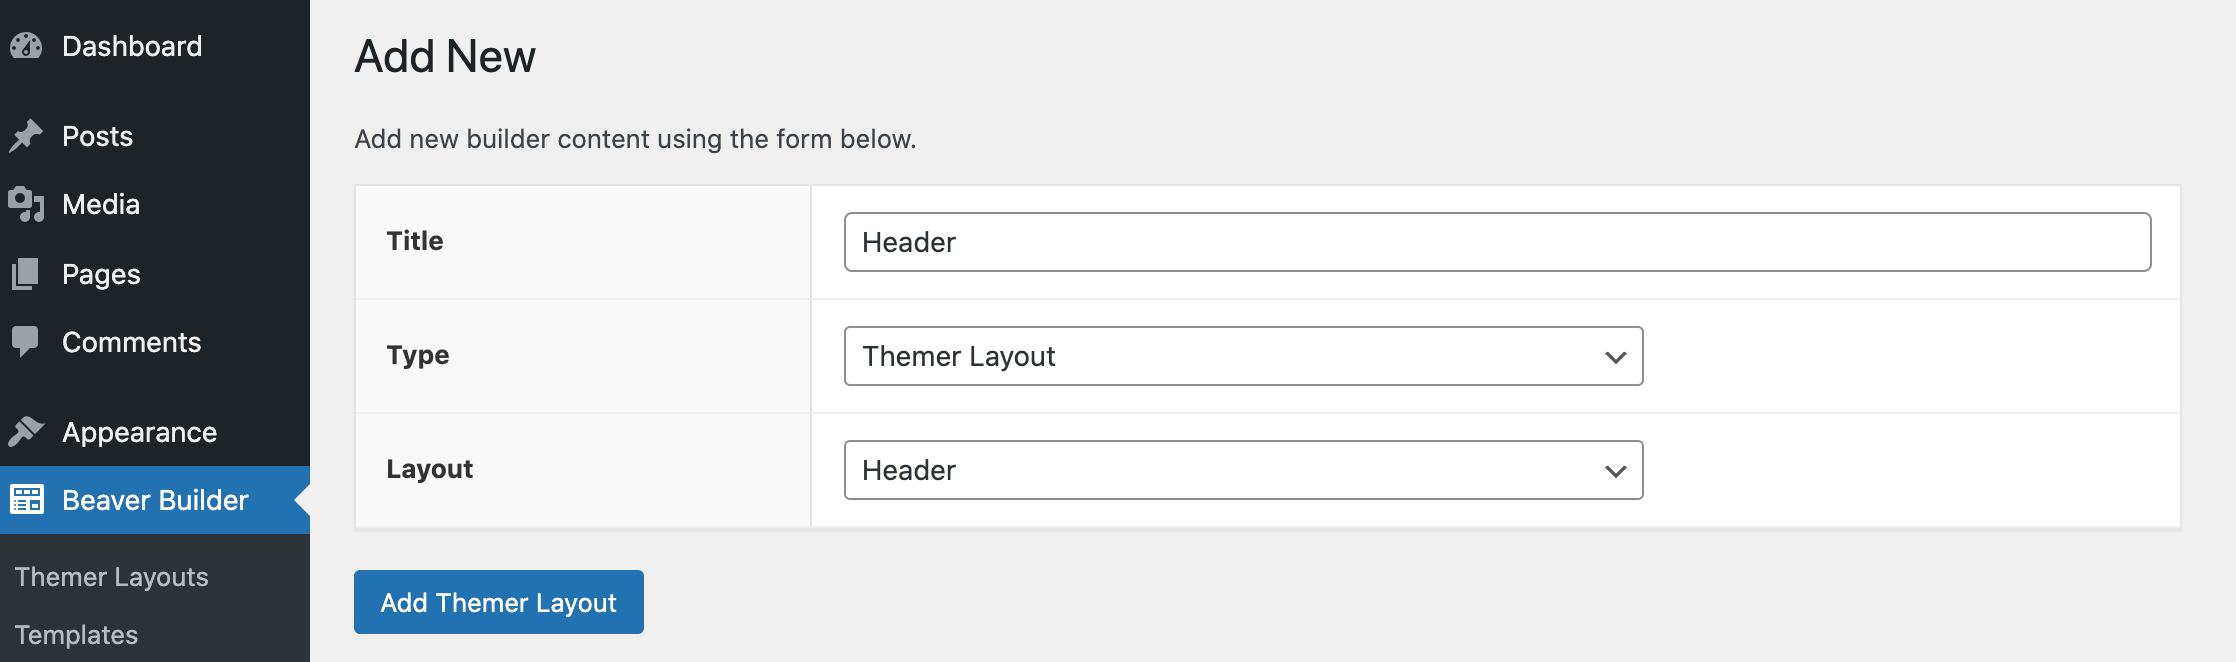 Beaver Builder's Add New Layout settings.